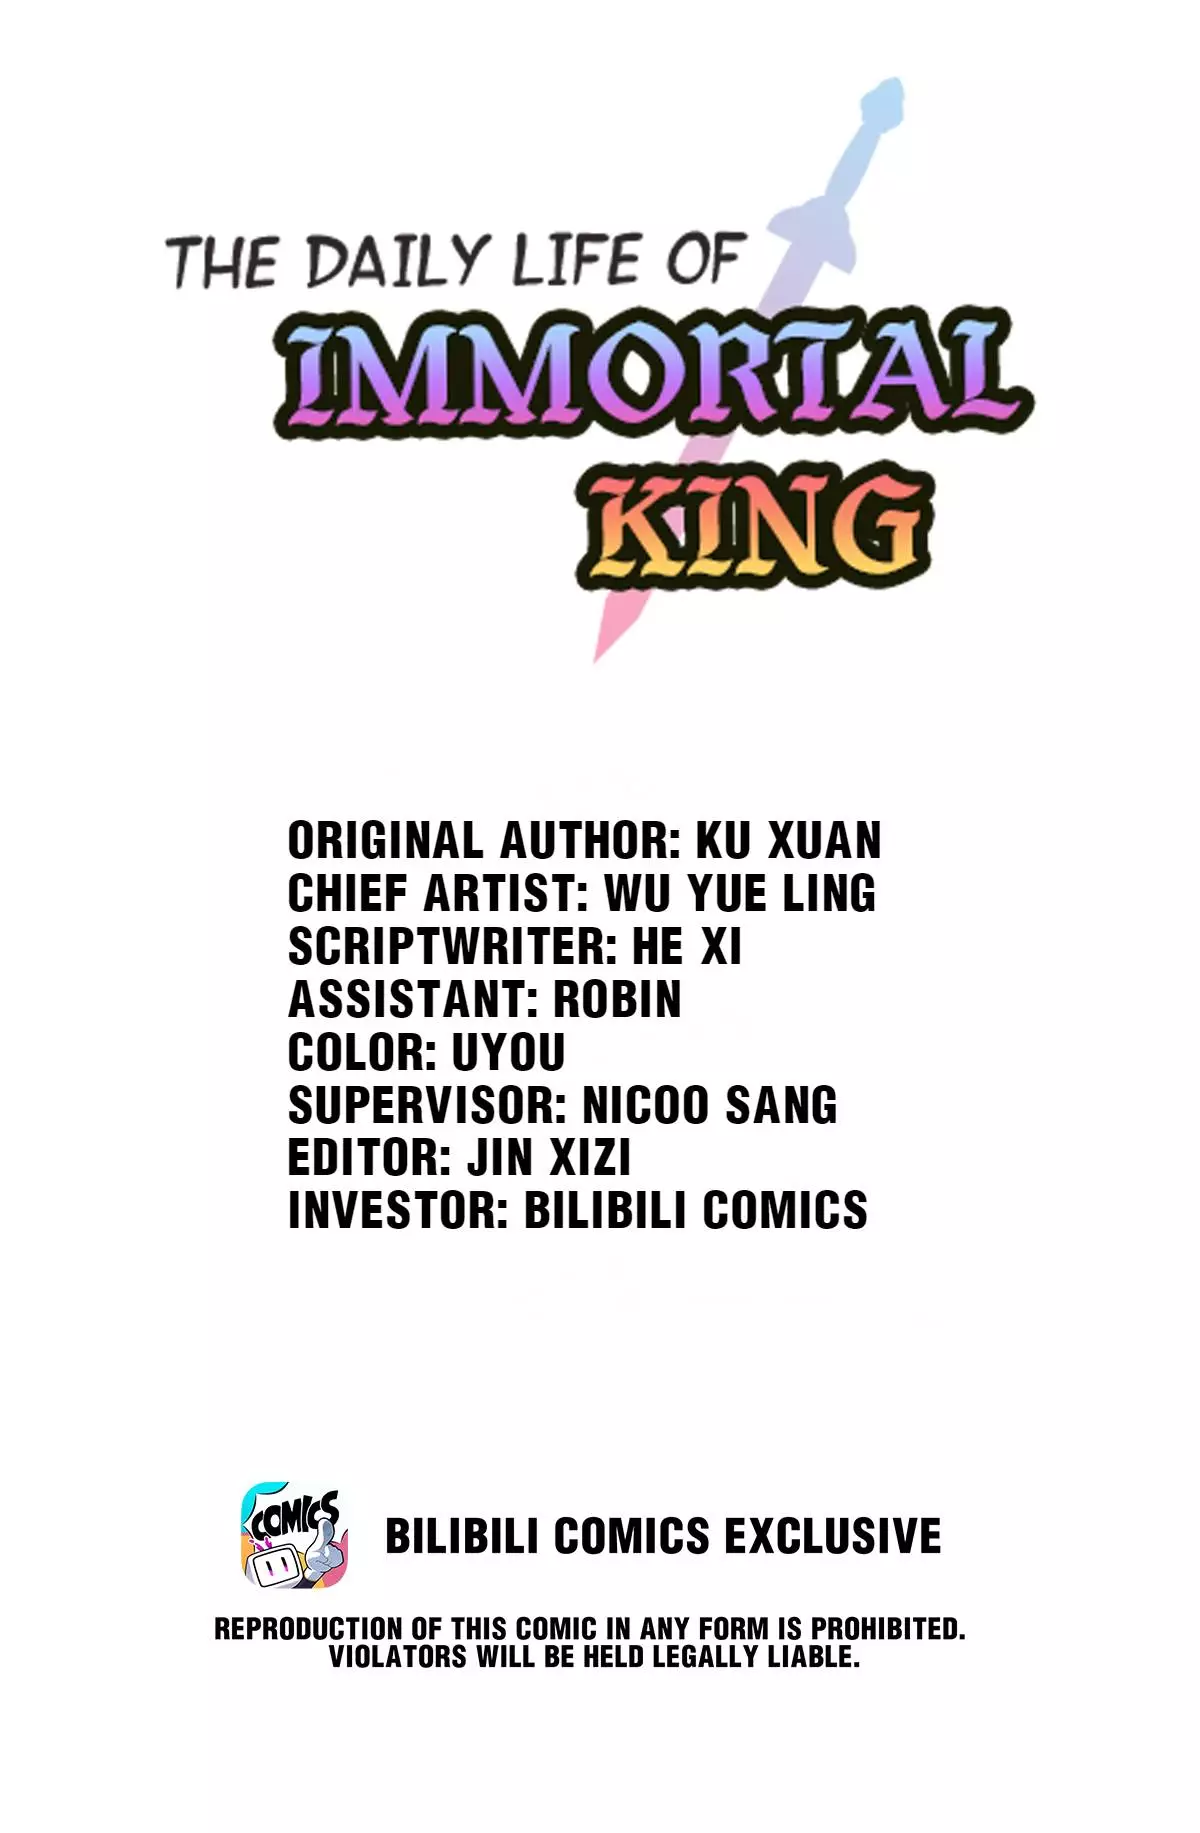 The Daily Life Of Immortal King - 76 page 1-2fb6fa15